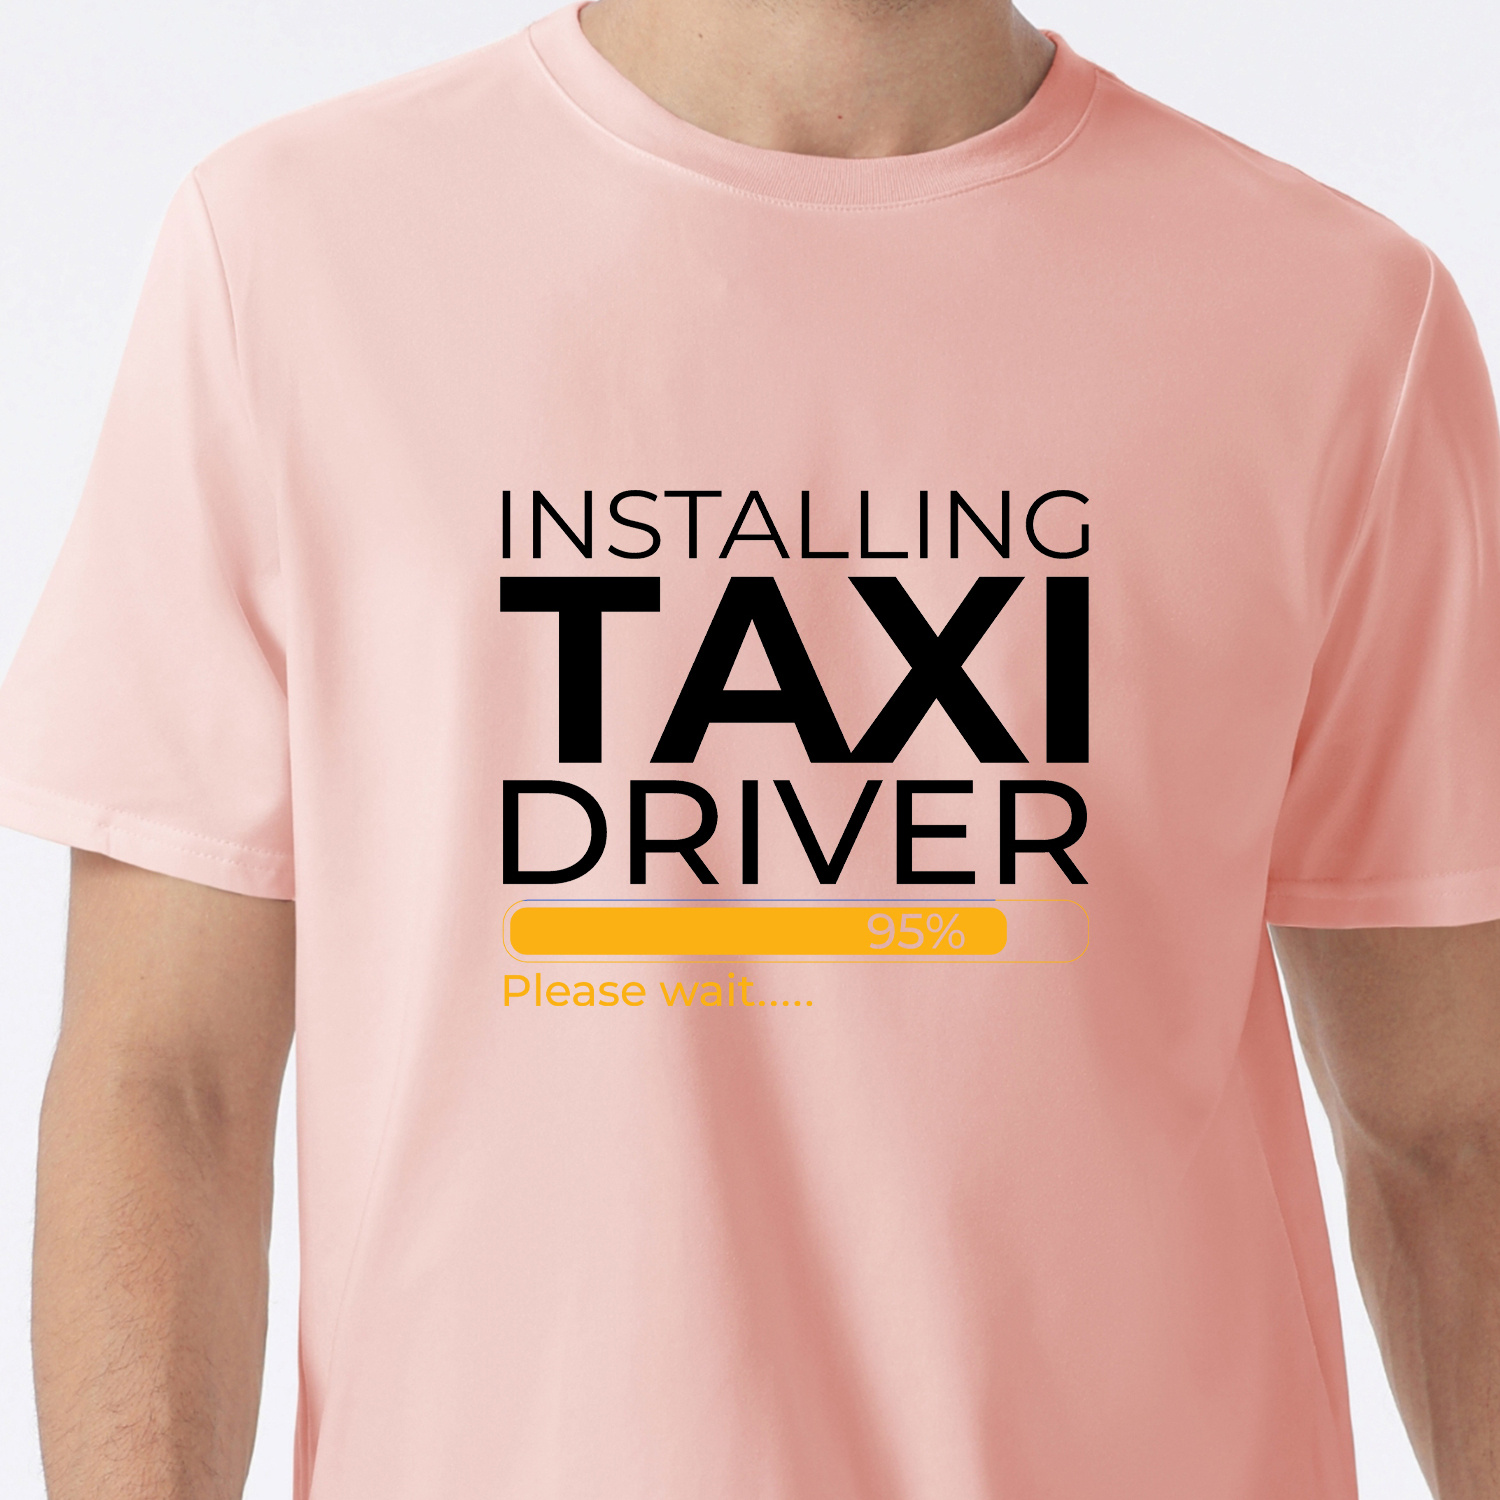 

Taxi Driver Print, Men's Round Crew Neck Short Sleeve, Simple Style Tee Fashion Regular Fit T-shirt, Casual Comfy Breathable Top For Spring Summer Holiday Leisure Vacation Men's Clothing As Gift